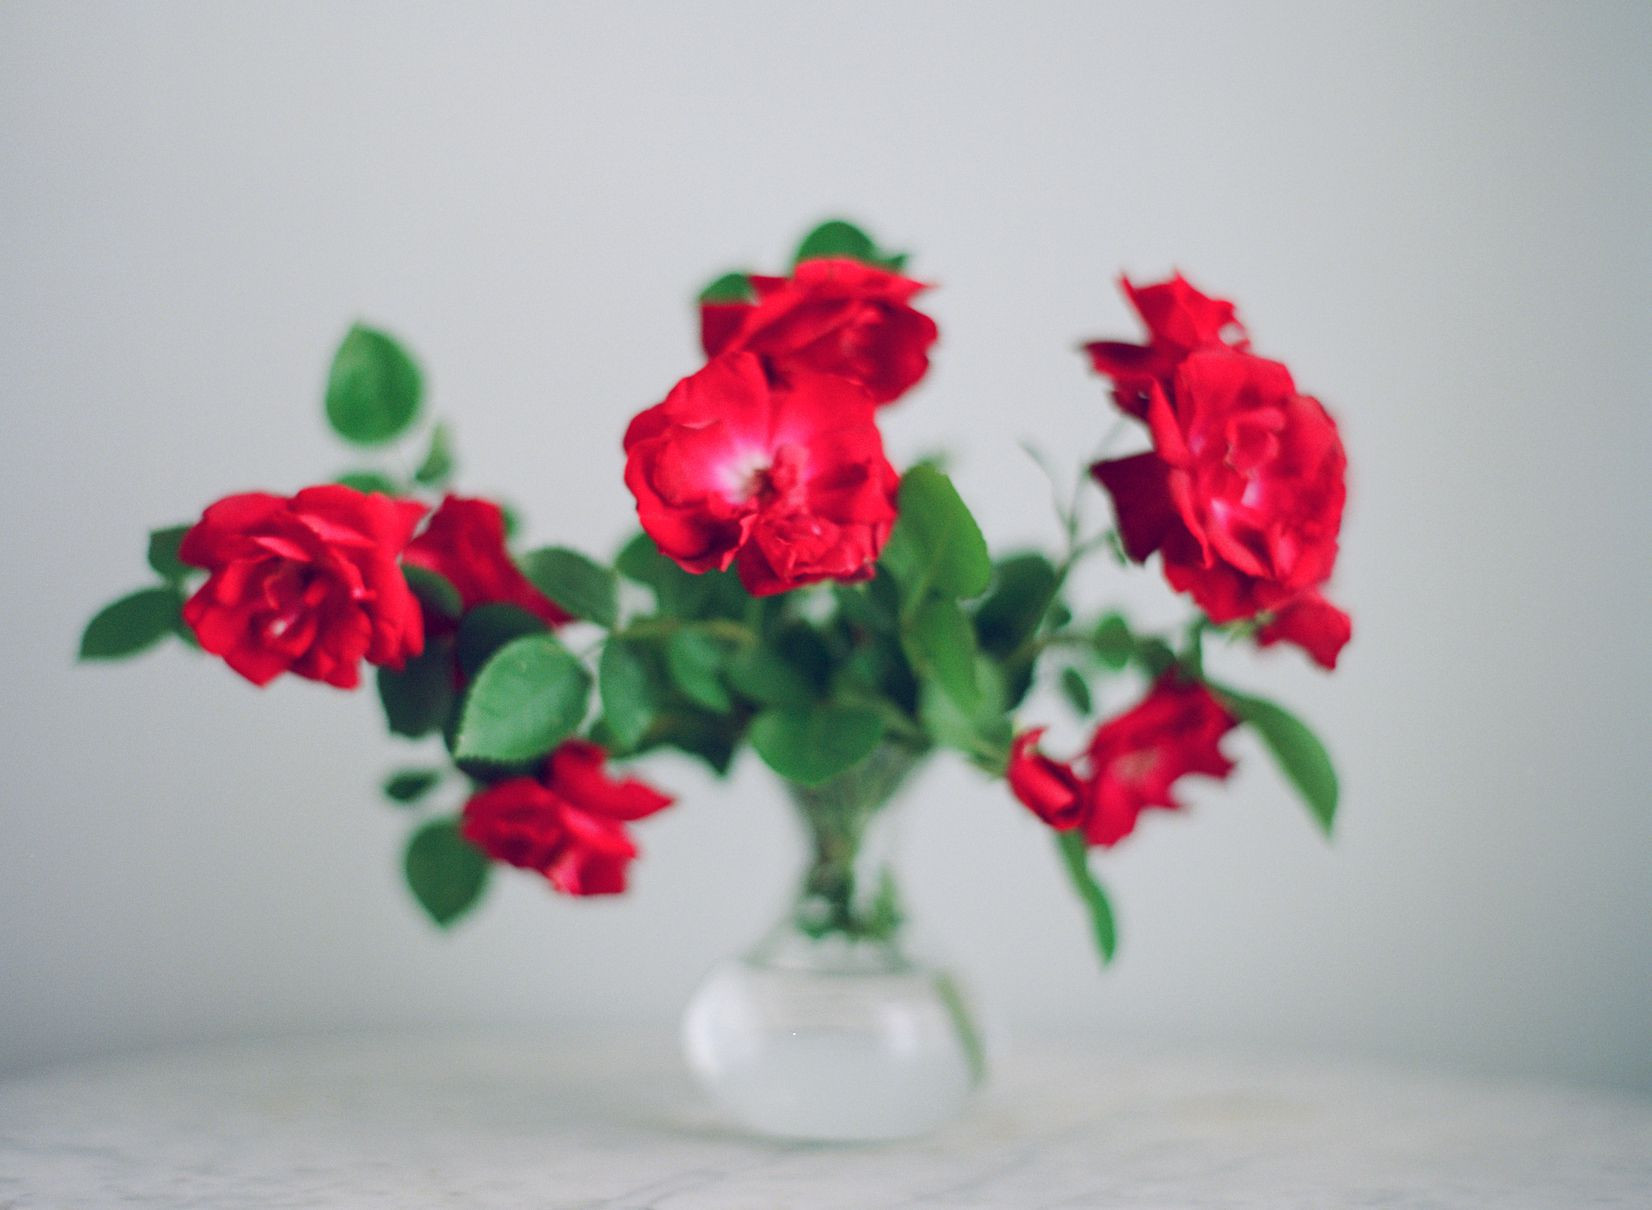 10 Best Small Artificial Flowers In Vase 2024 free download small artificial flowers in vase of how to prevent rose necks from bending intended for stocksy txpeecf5b89qfq100 medium 275871 5a83325fae9ab80036310a24